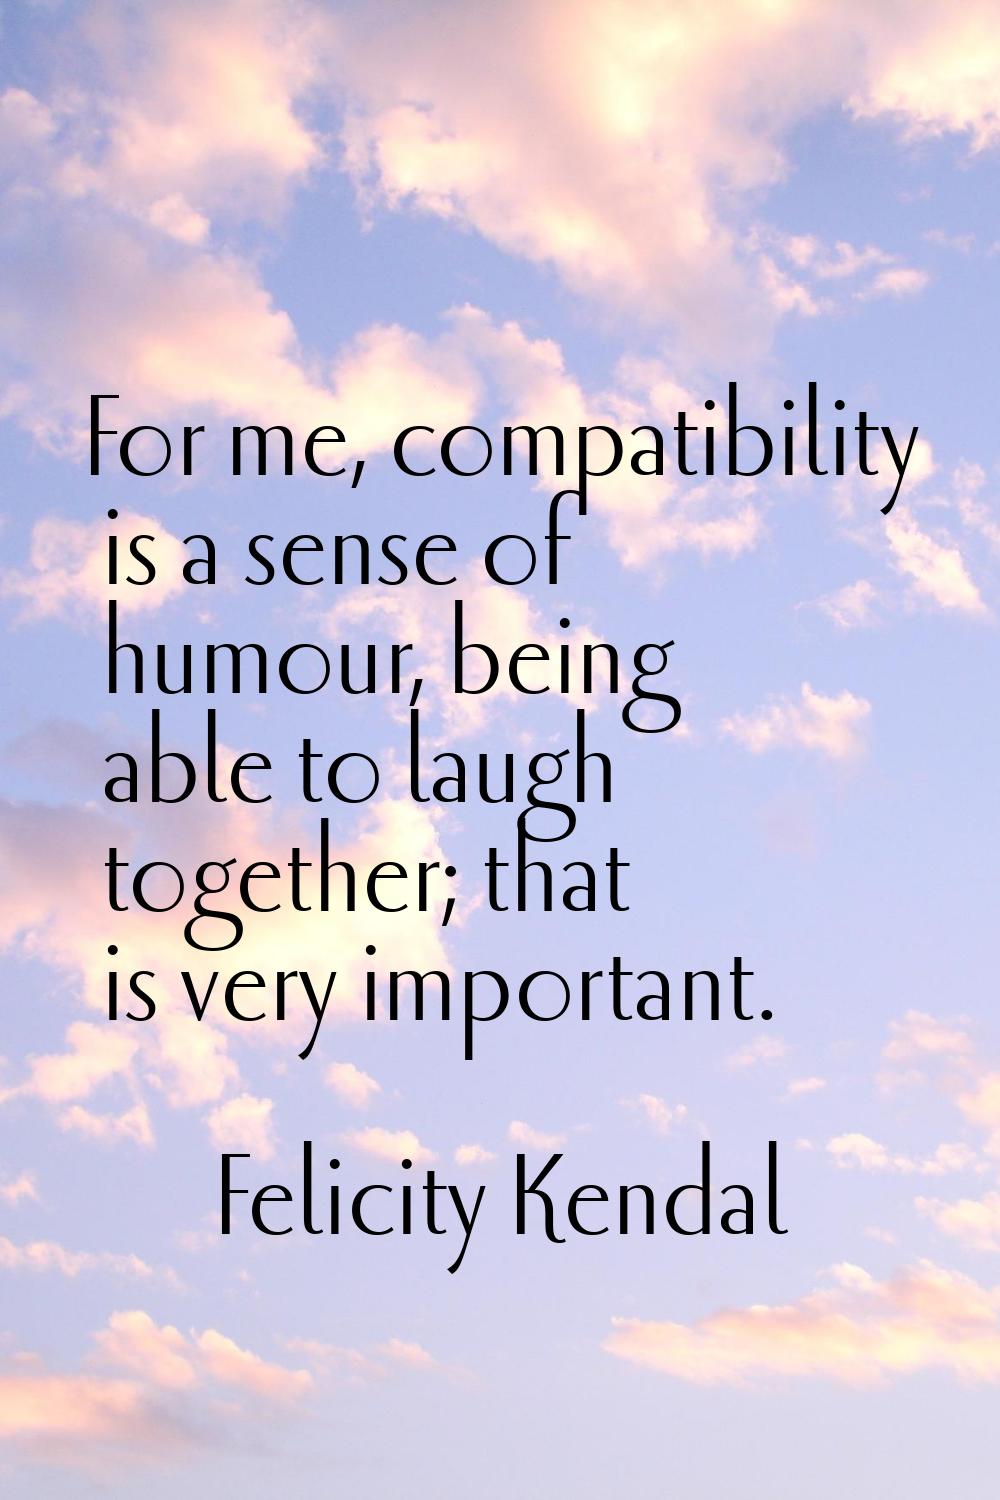 For me, compatibility is a sense of humour, being able to laugh together; that is very important.